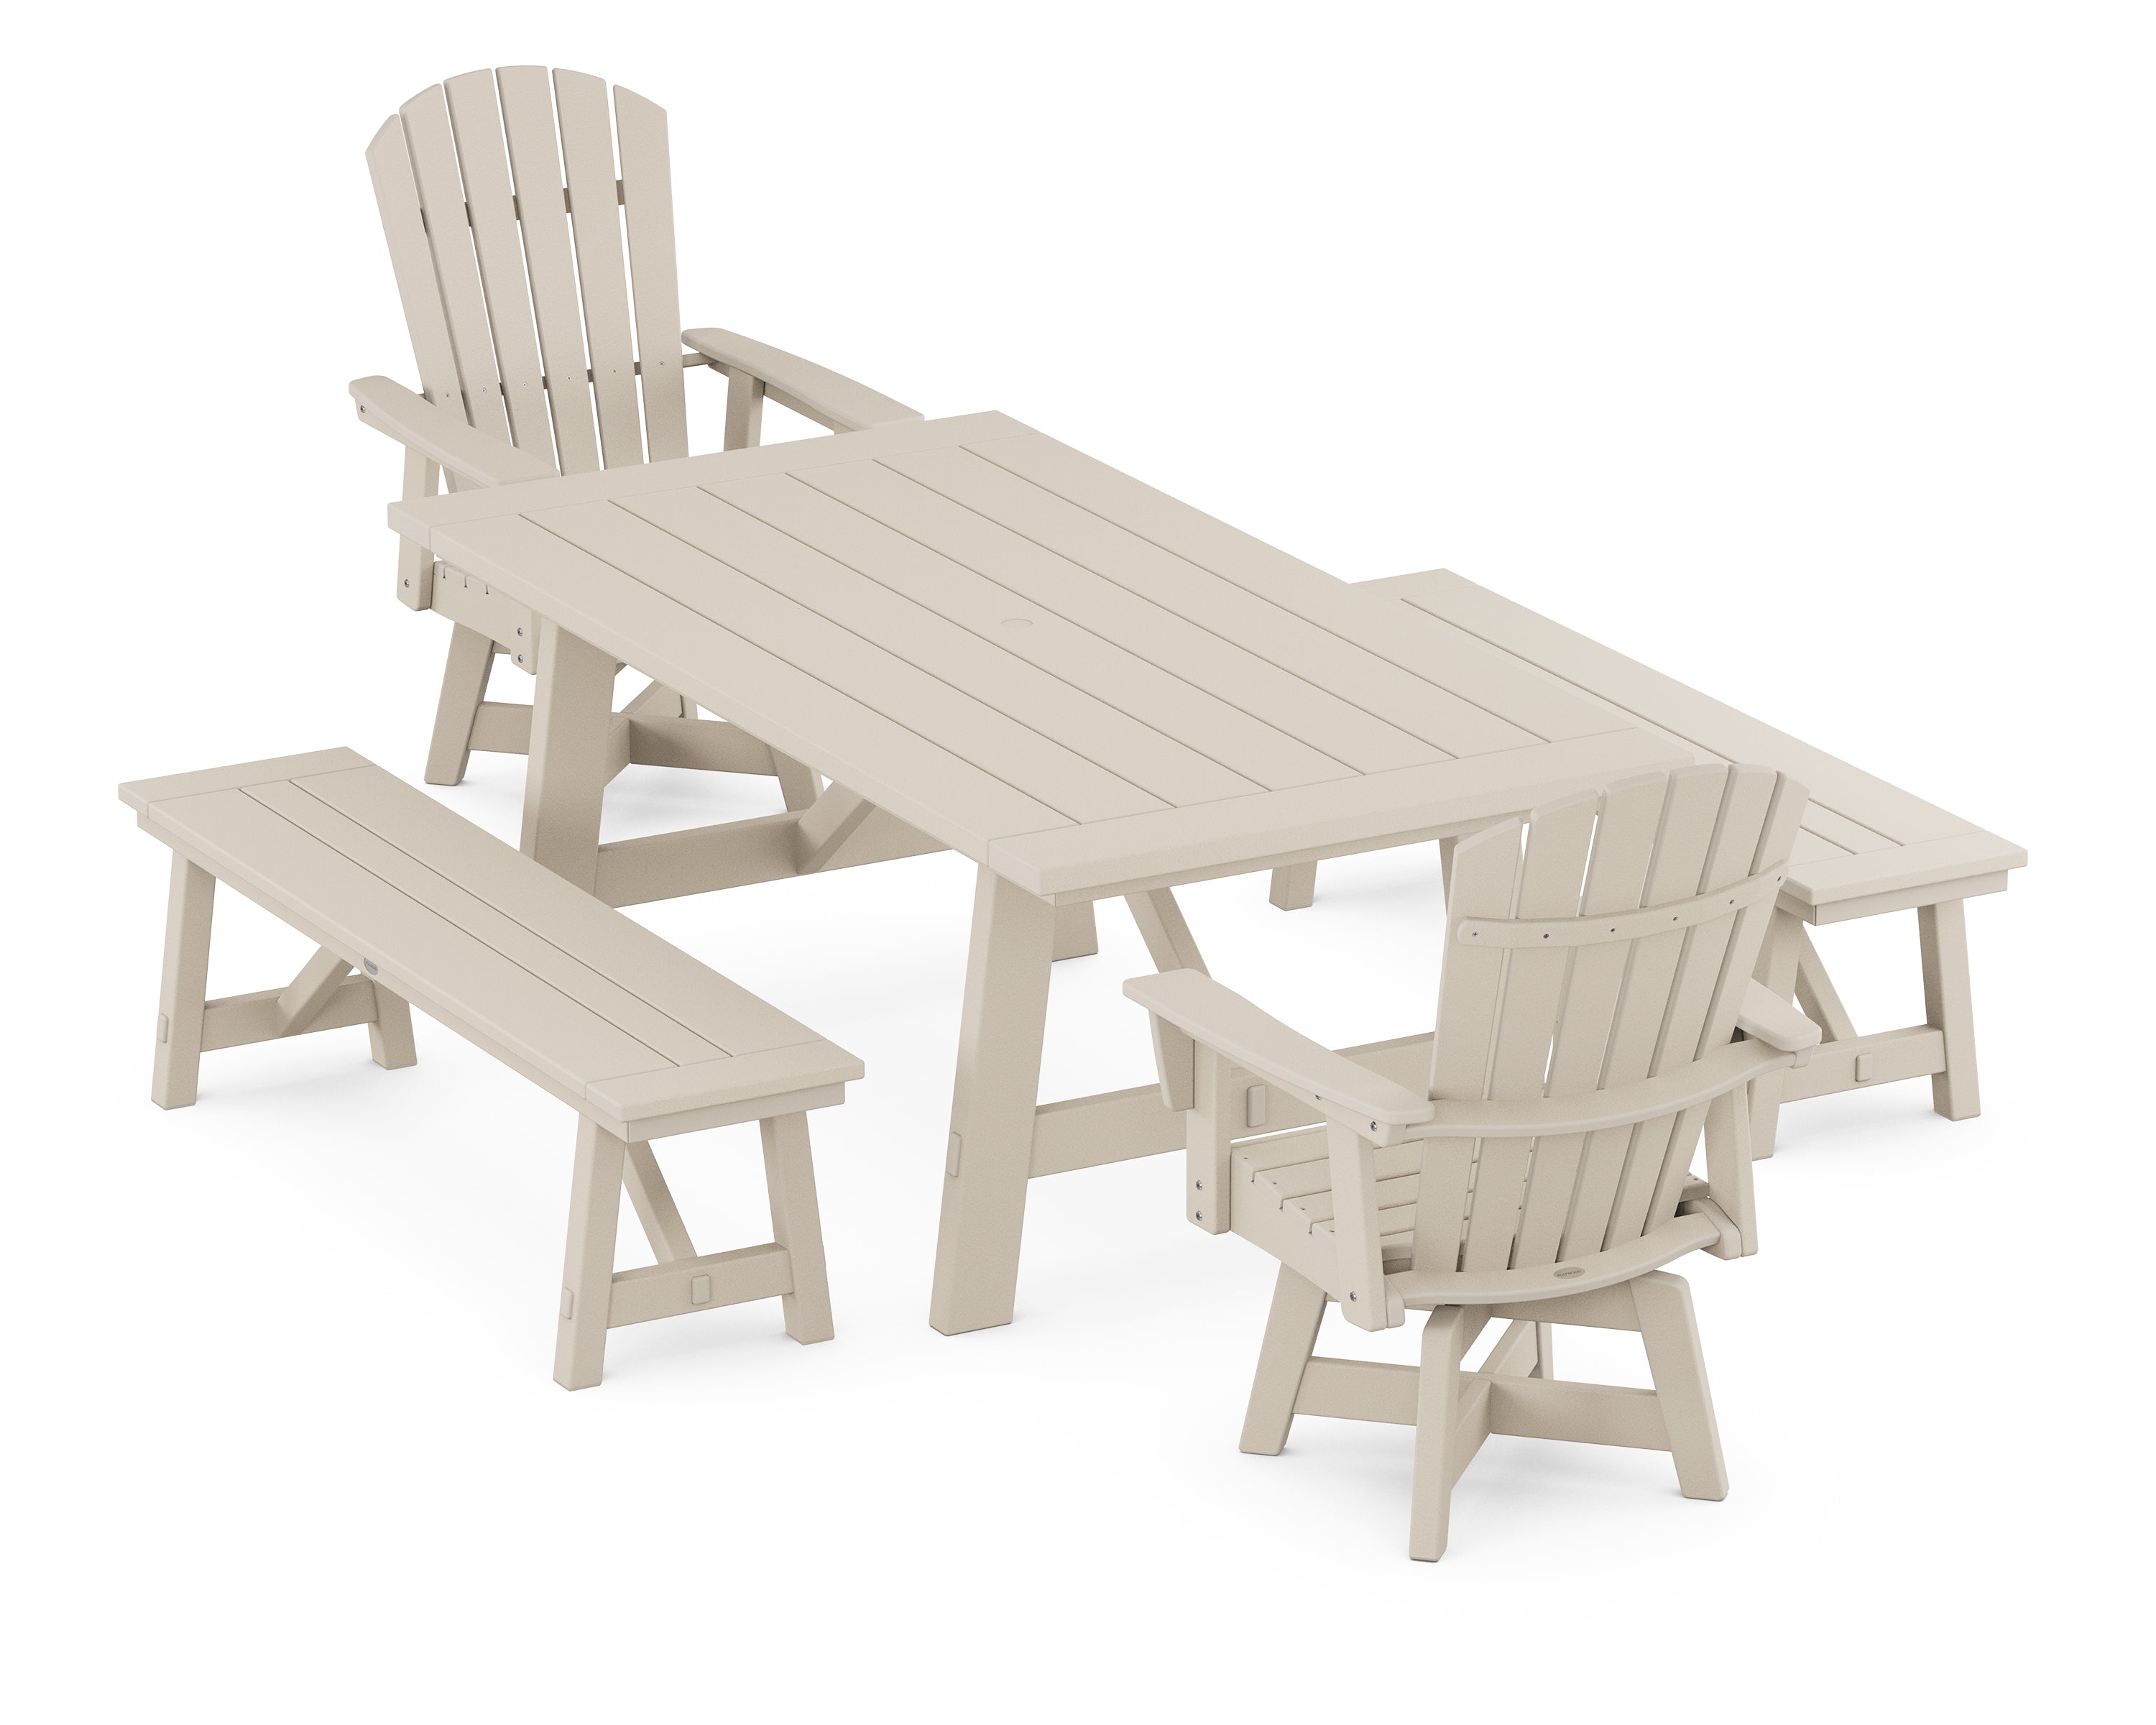 POLYWOOD® Nautical Curveback Adirondack Swivel Chair 5-Piece Rustic Farmhouse Dining Set With Benches in Sand